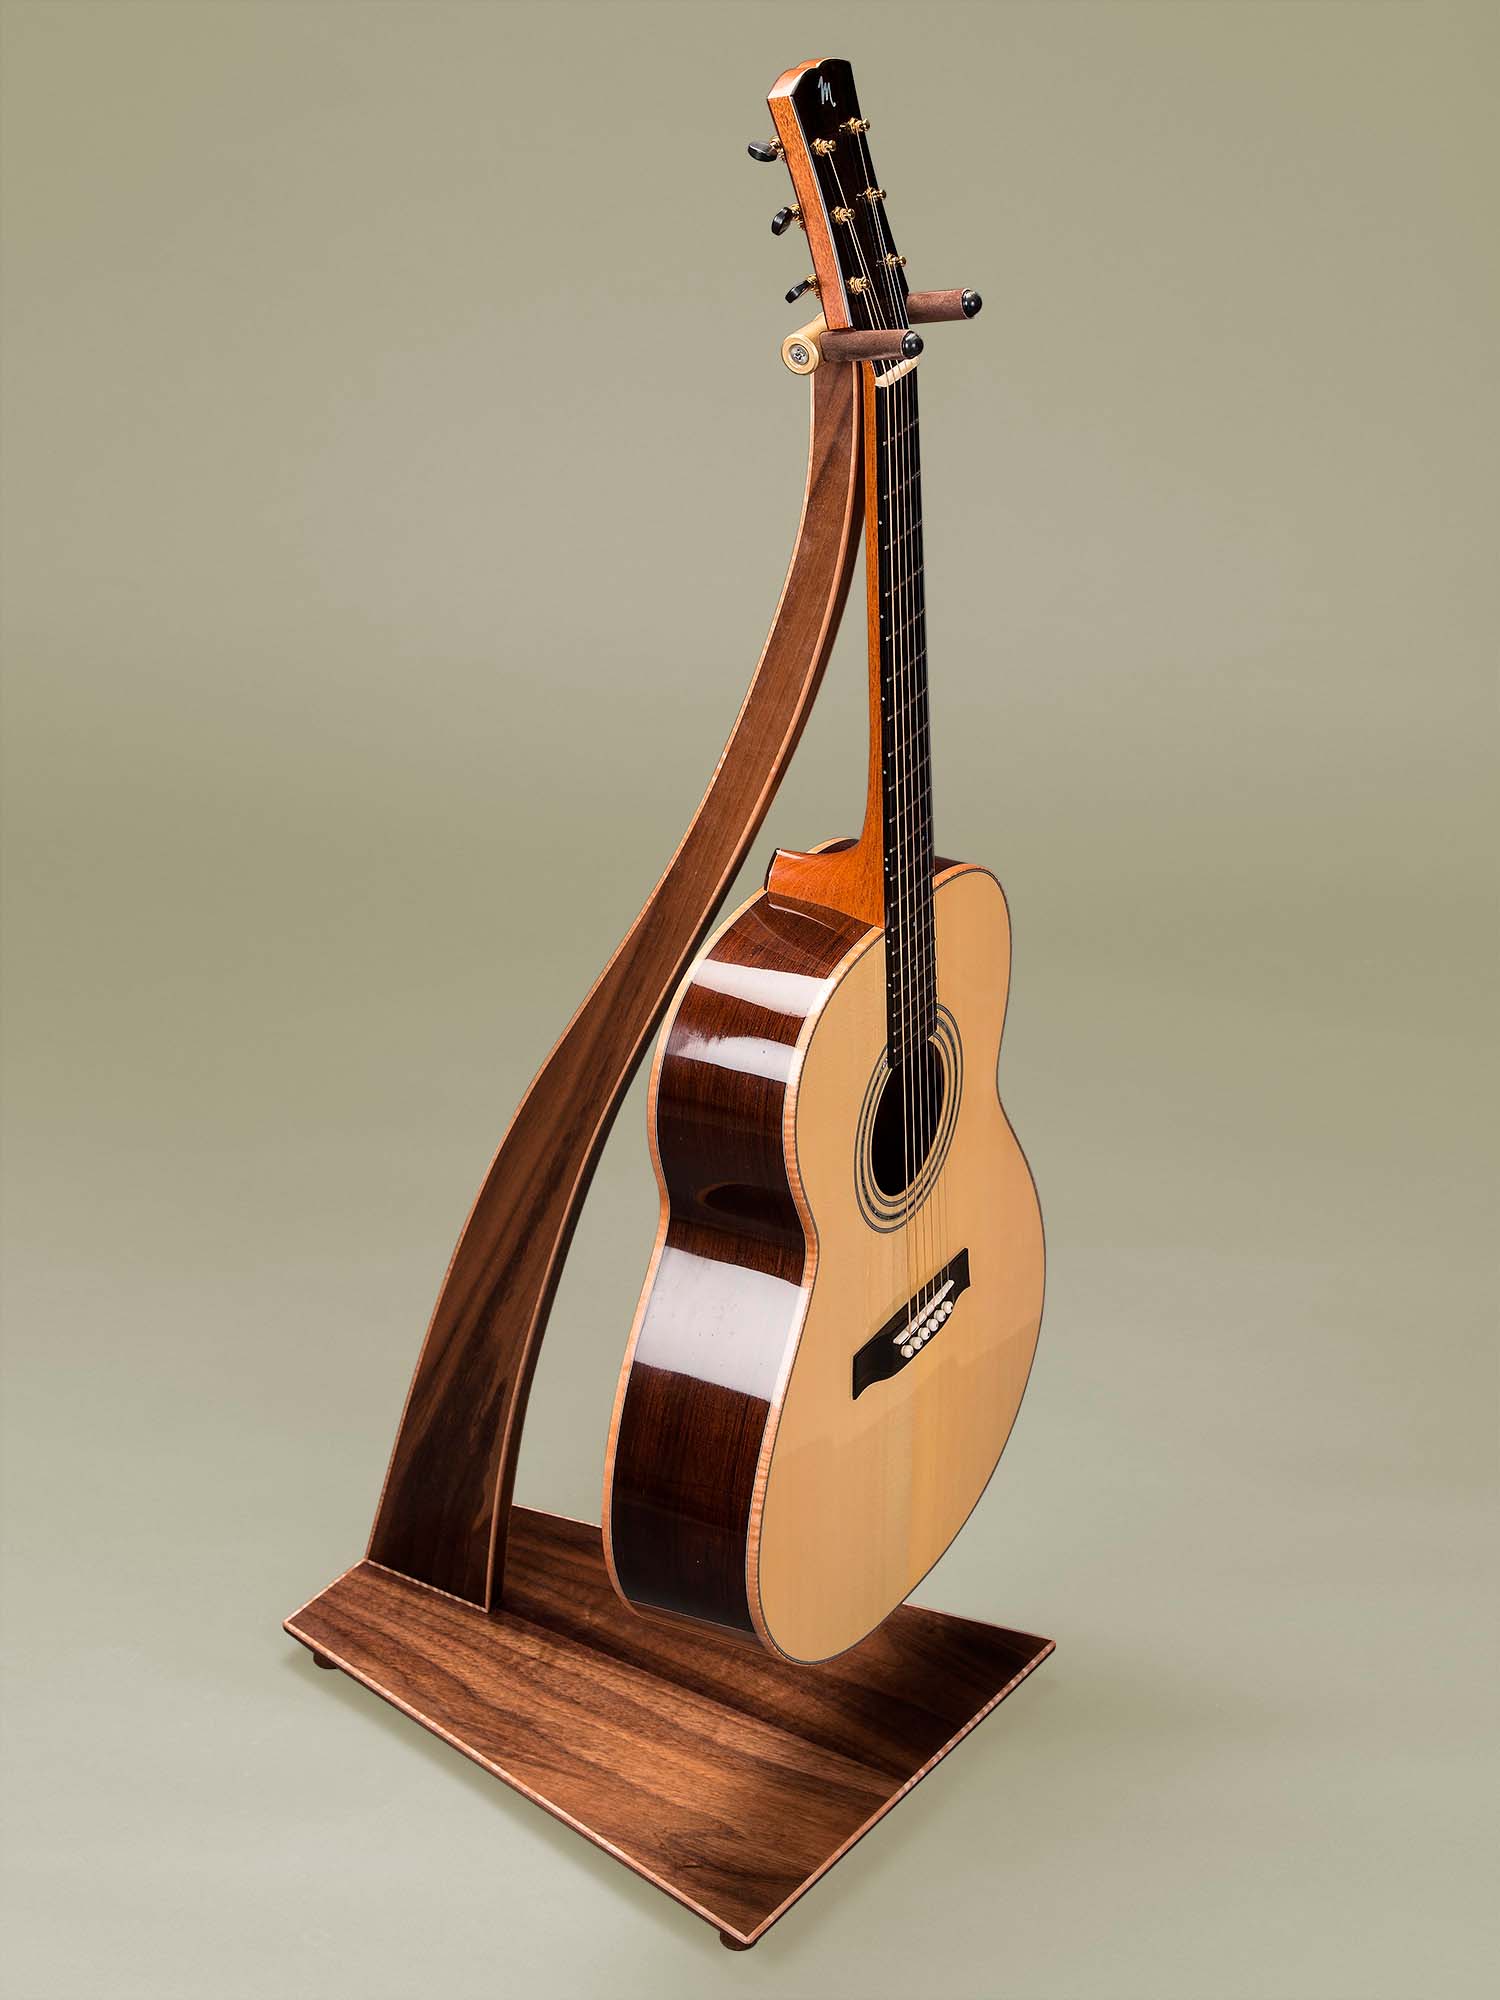 SM Guitar Stand in Walnut with Curly Maple Binding.